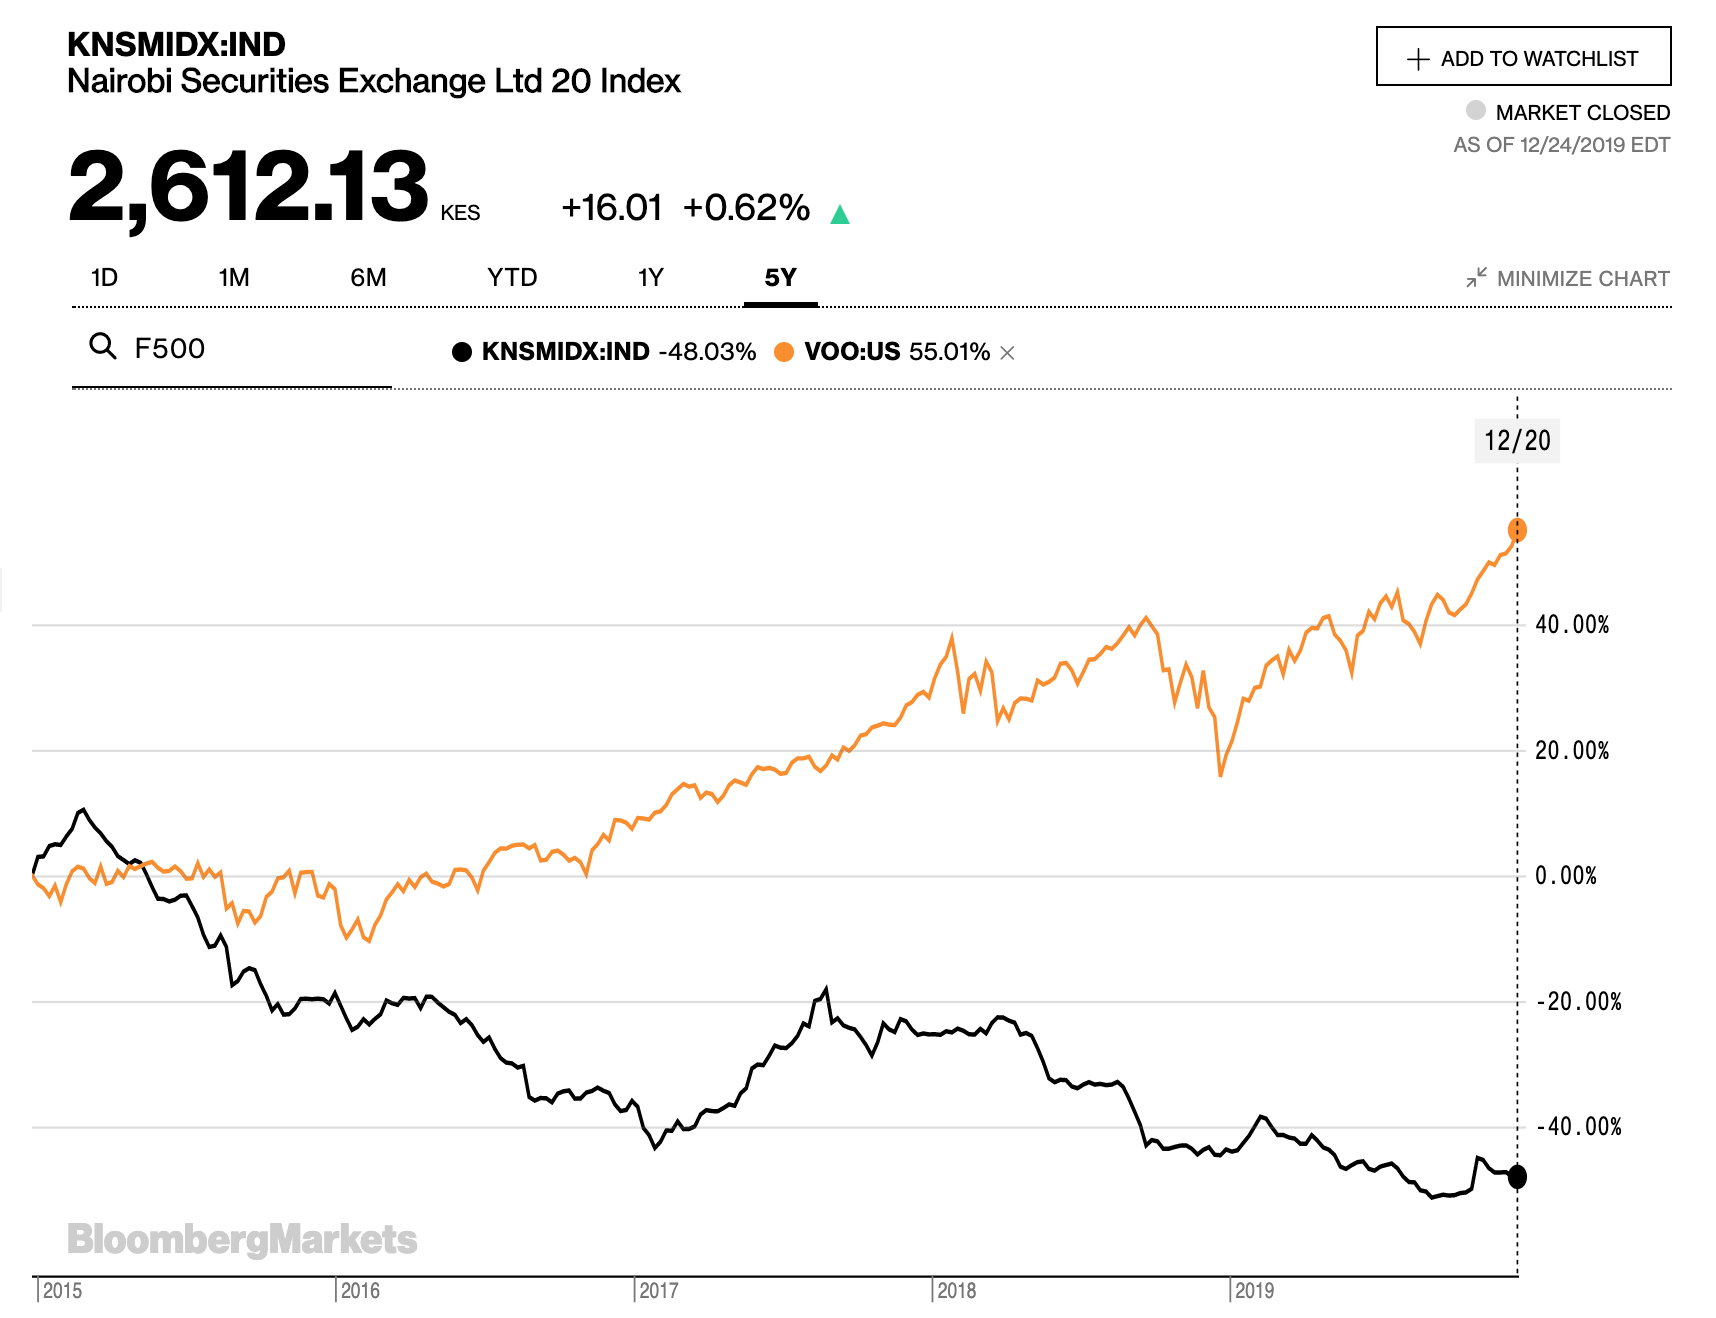 The NSE 20 compared to the S&amp;P 500 over 5 years (2015 - 2019). The NSE 20 lost 48%, while the Fortune 500 gained 55%. Credits: https://www.bloomberg.com/quote/KNSMIDX:IND